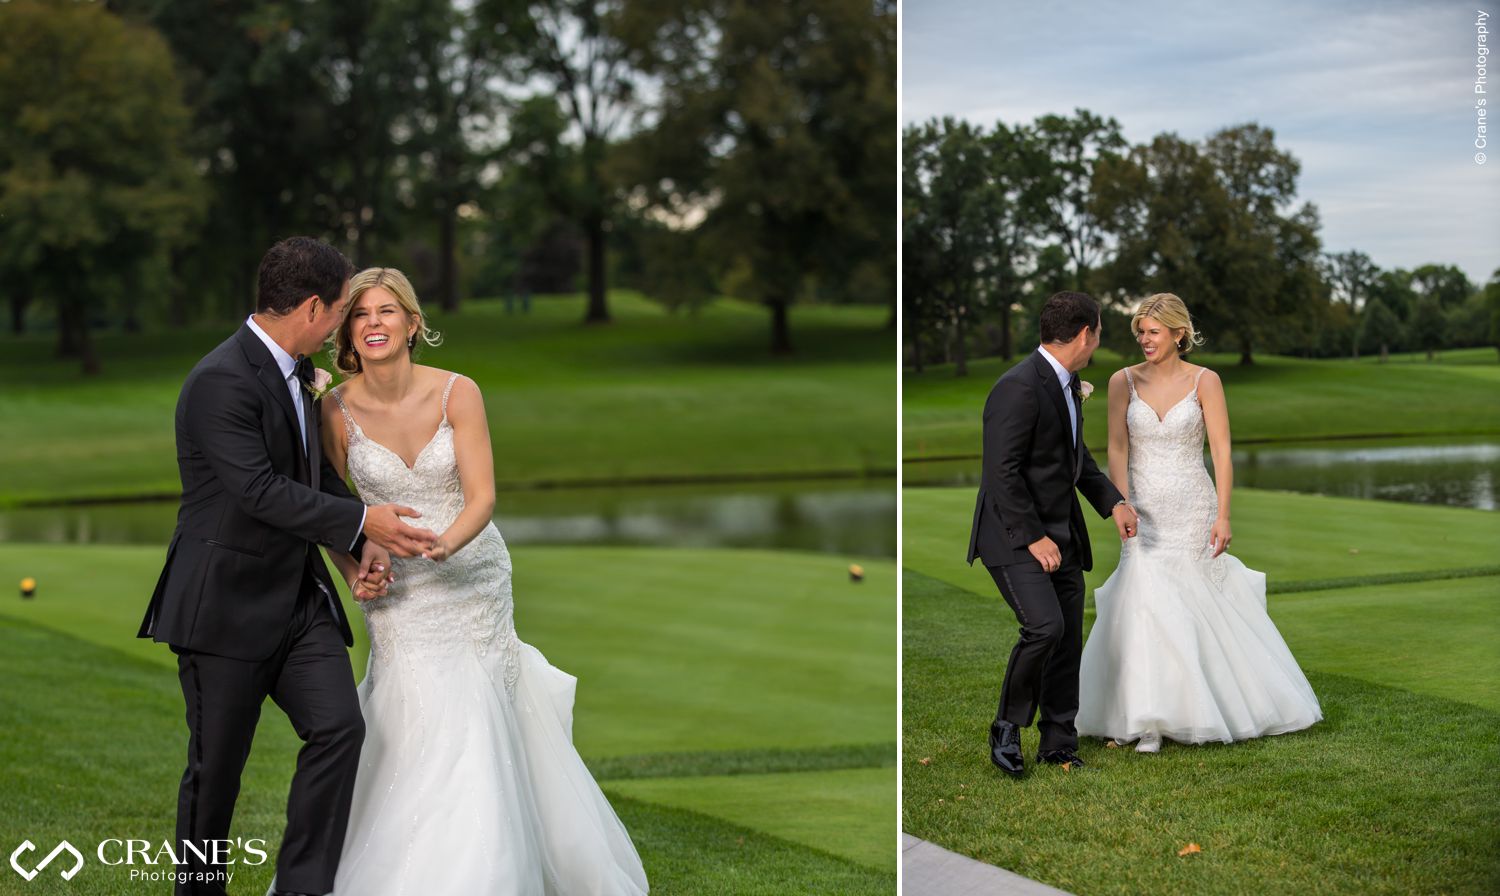 Chrissy and Joe - A Butterfield Country Club Wedding 50